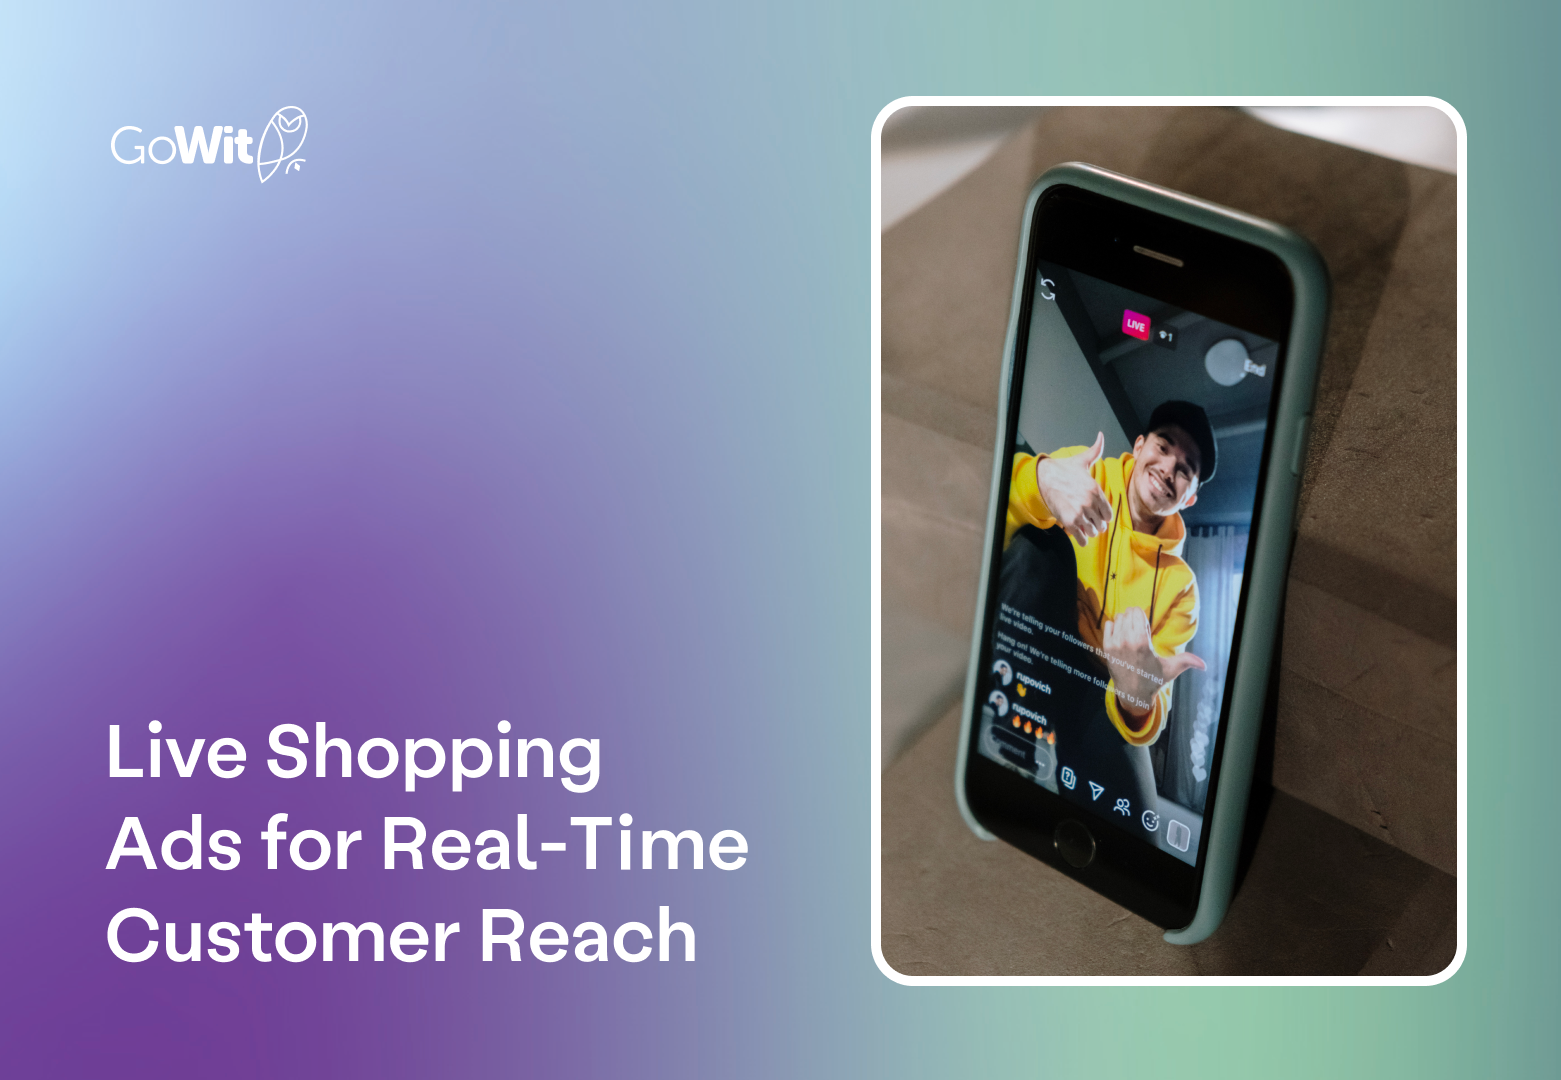 Live shopping ads for real-time customer reach